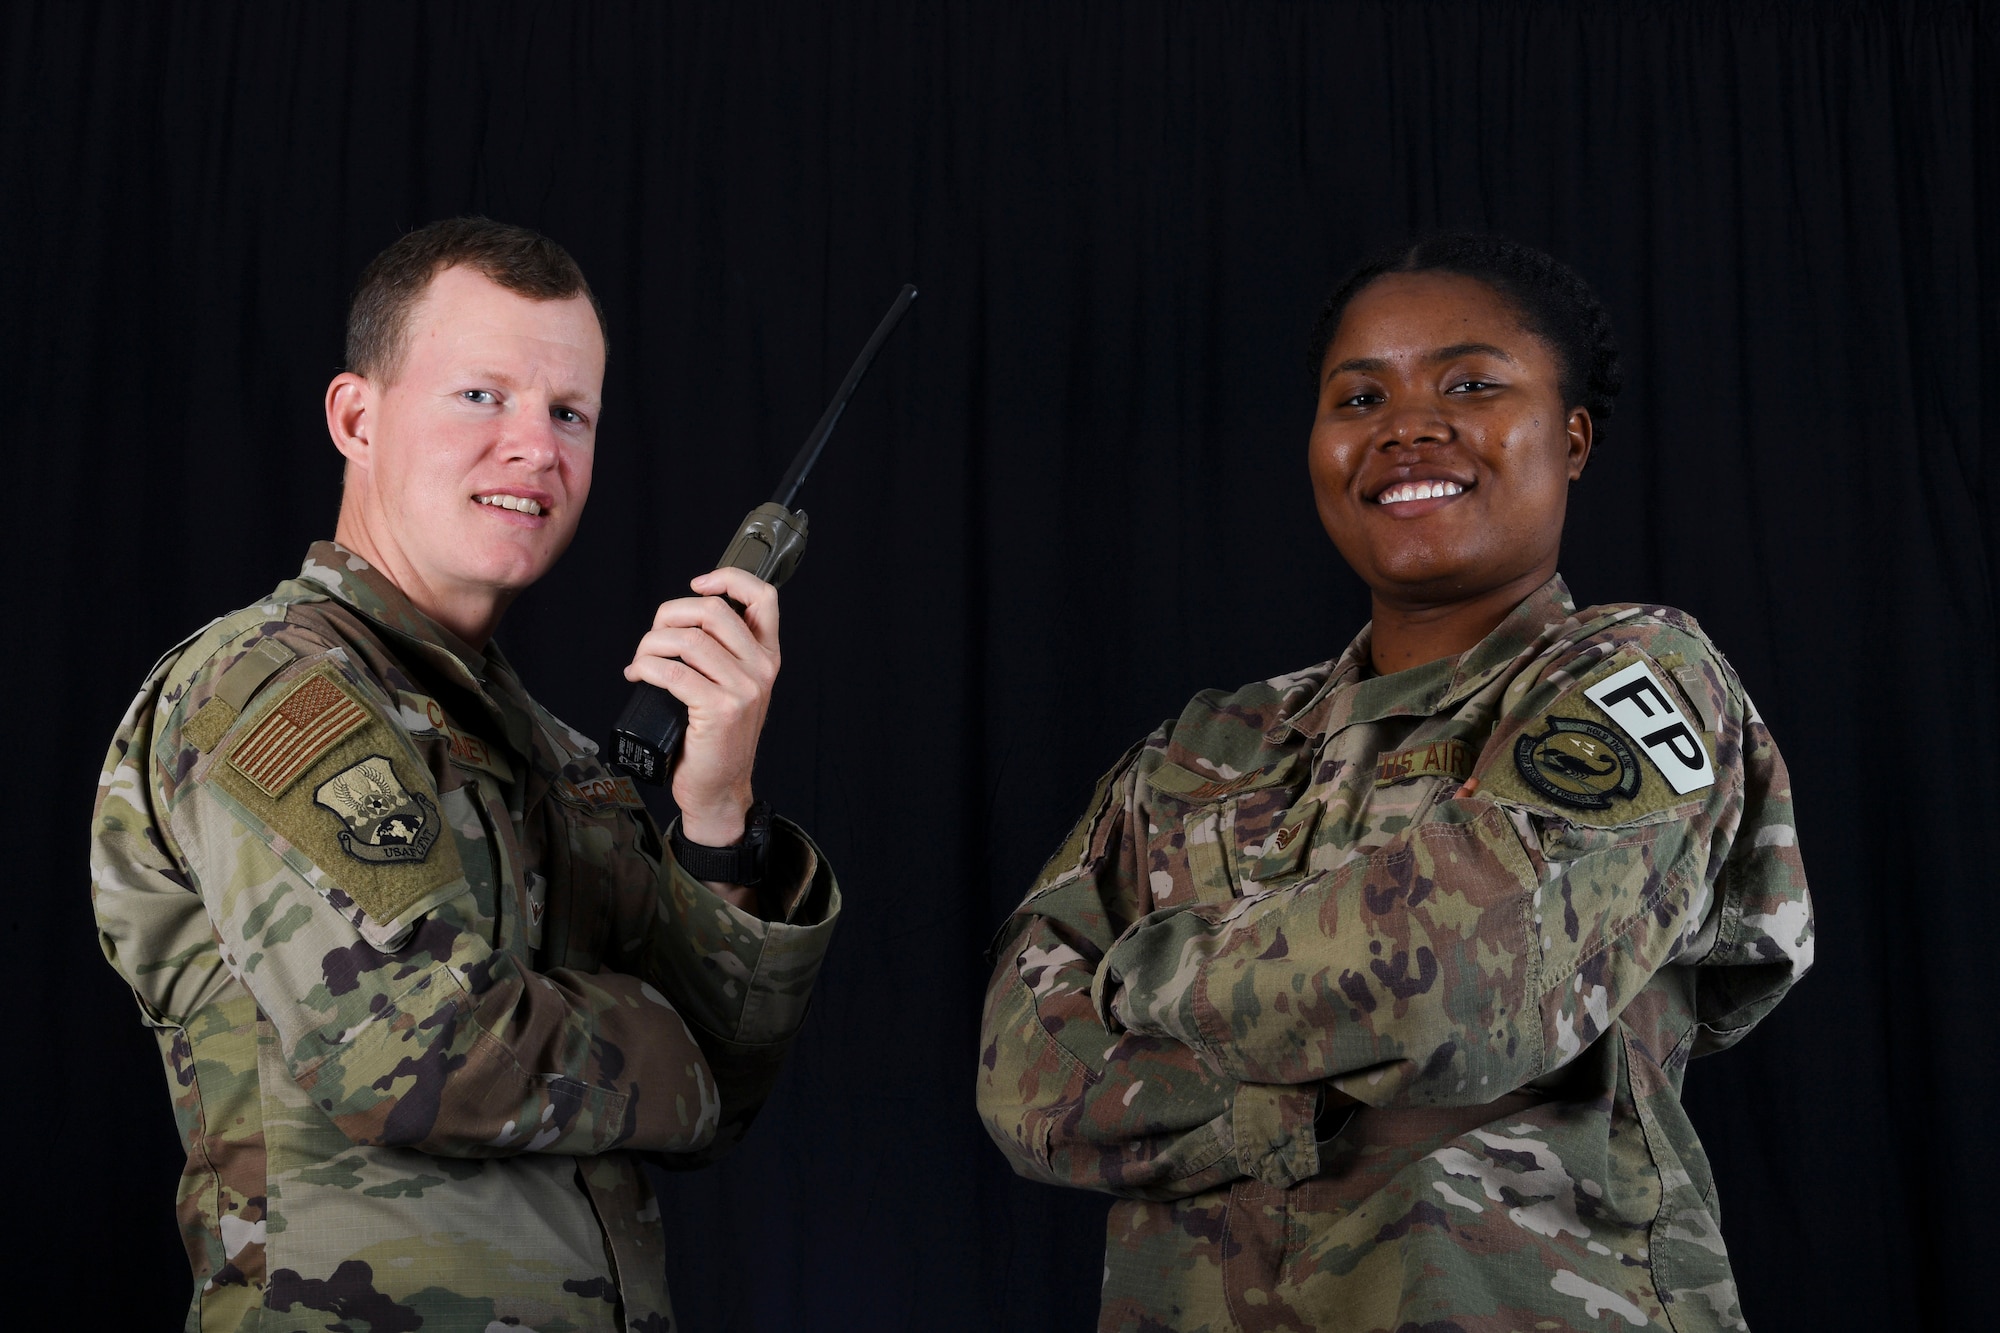 Protection personnel Amn Michael Coveney and Staff Sgt. Aneke Miller pose for a photo at Al Dhafra Air Base, United Arab Emirates, Jan. 31, 2019.